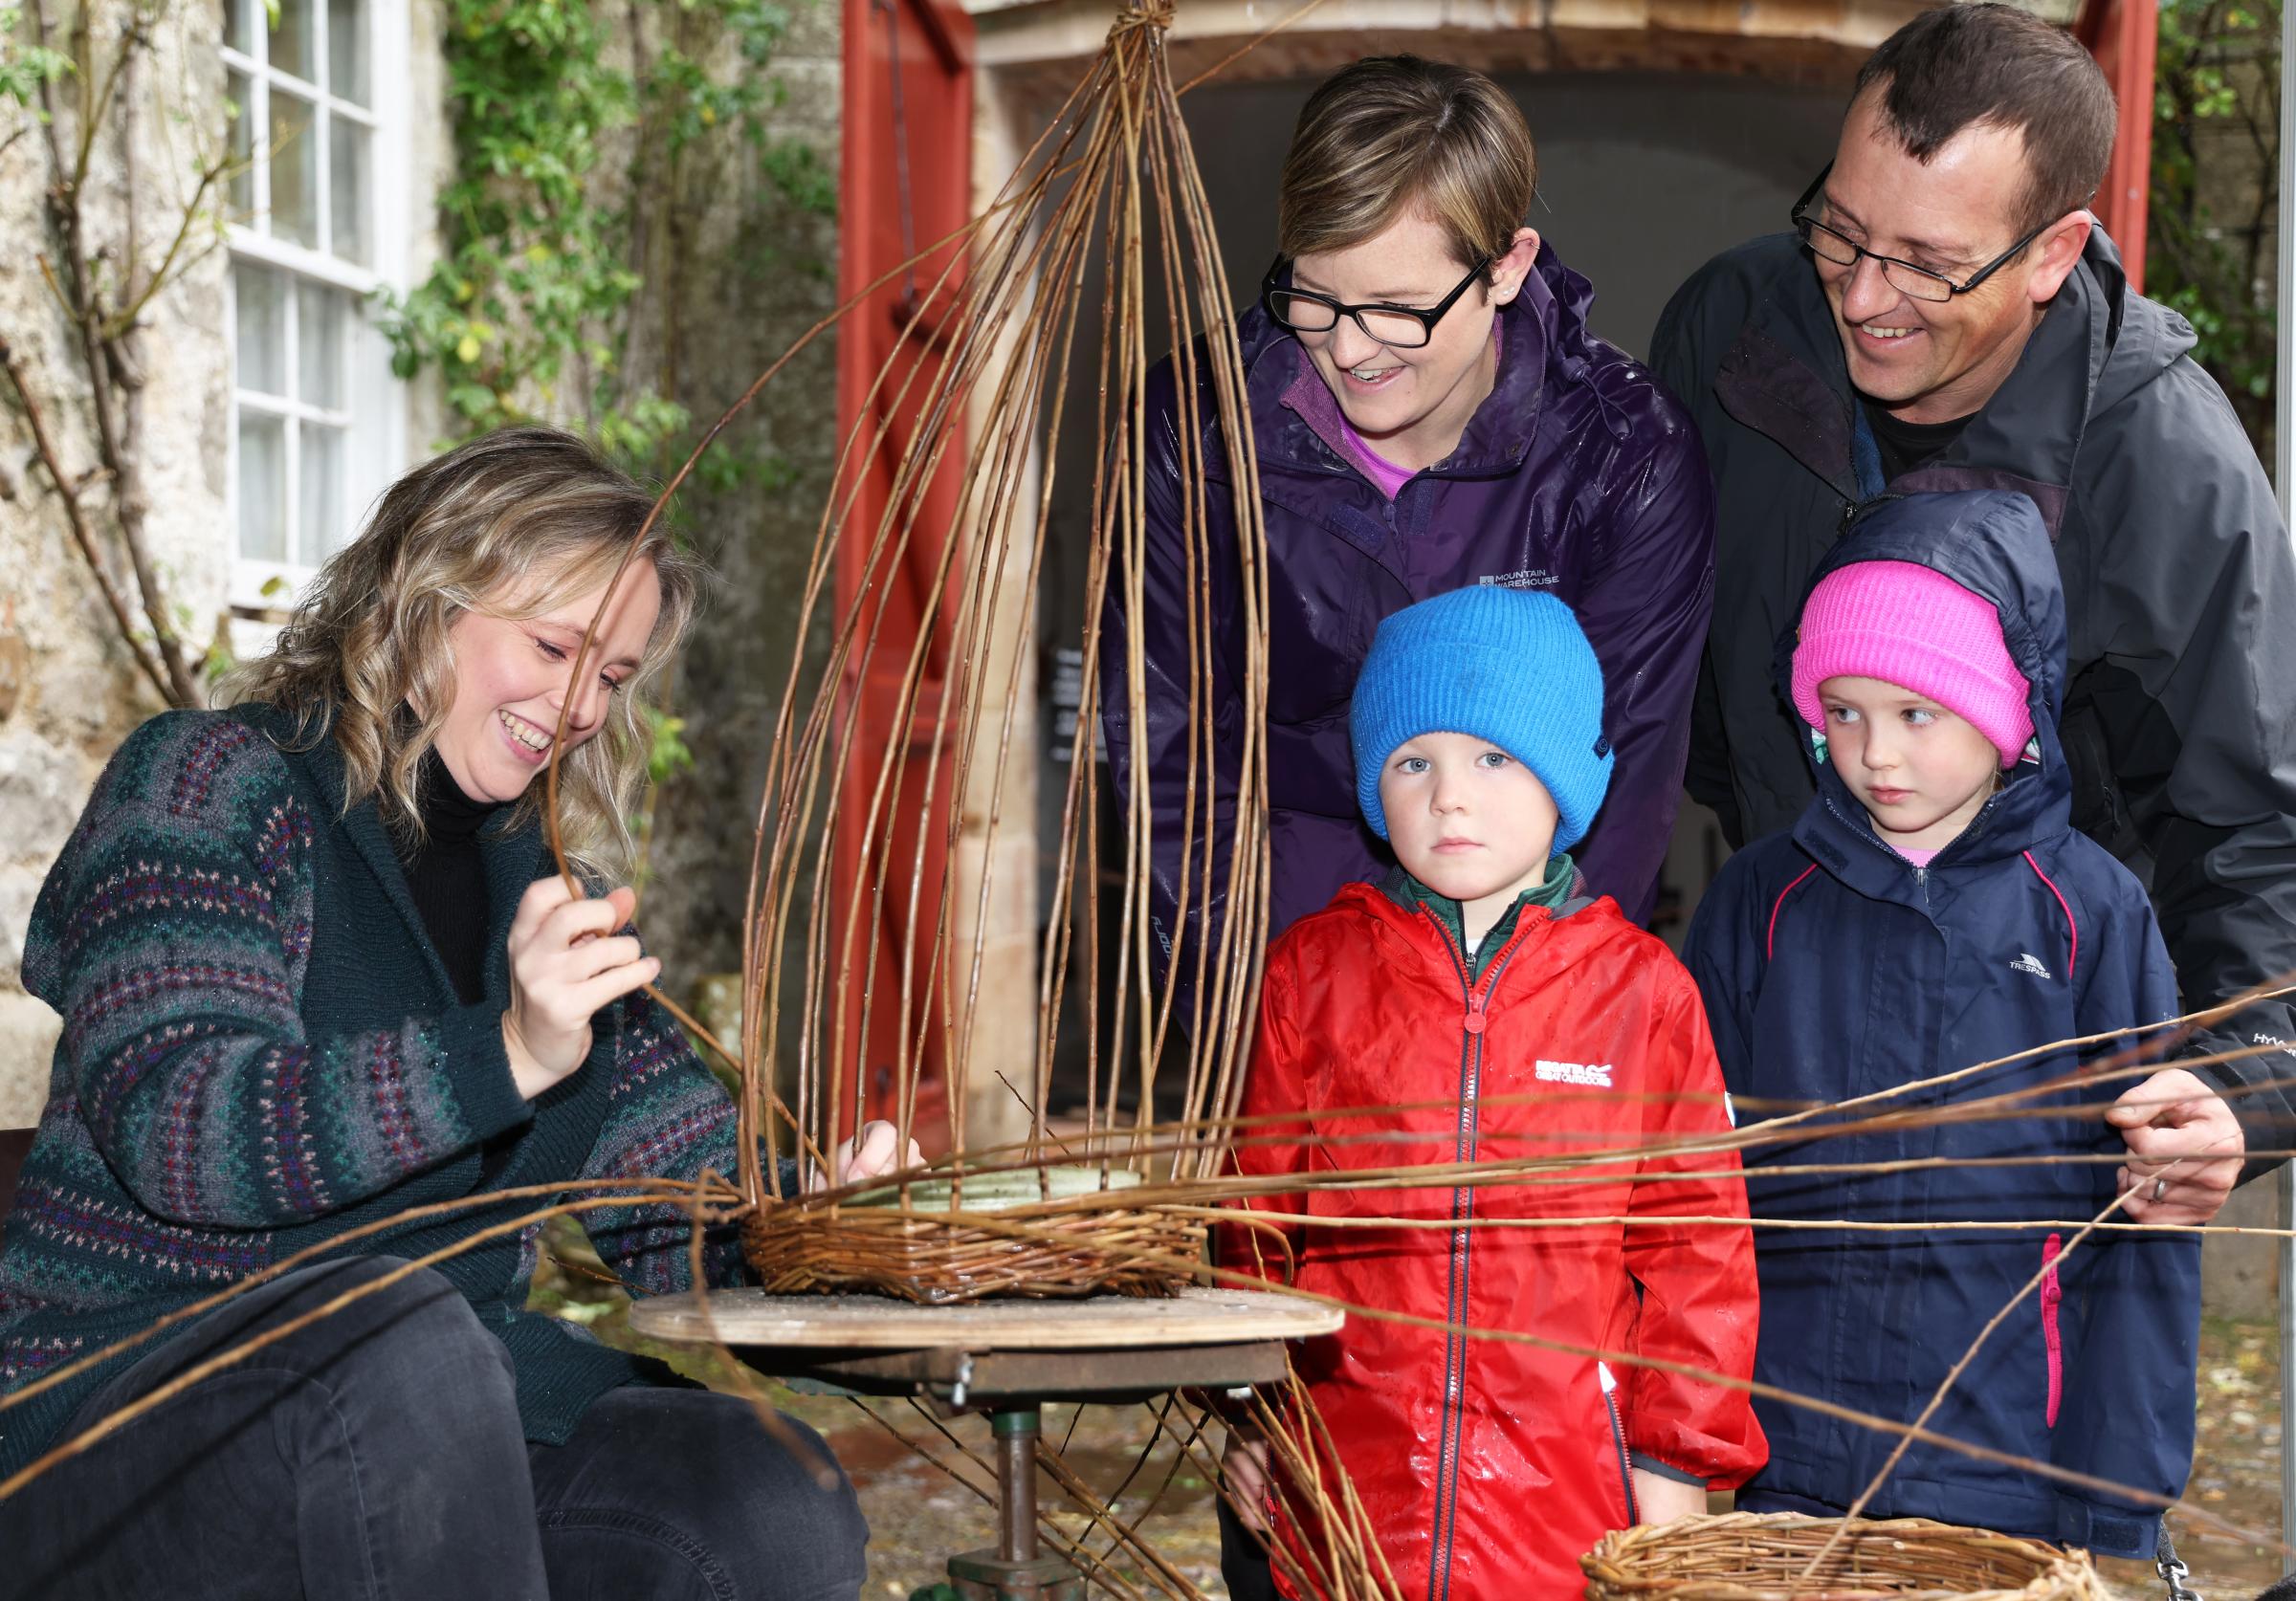 Ciara Smith, demonstrating the art of basket weaving to David, Nicola, Grace and Eddie Patterson, during the Harvest Fest at Florencecourt House.